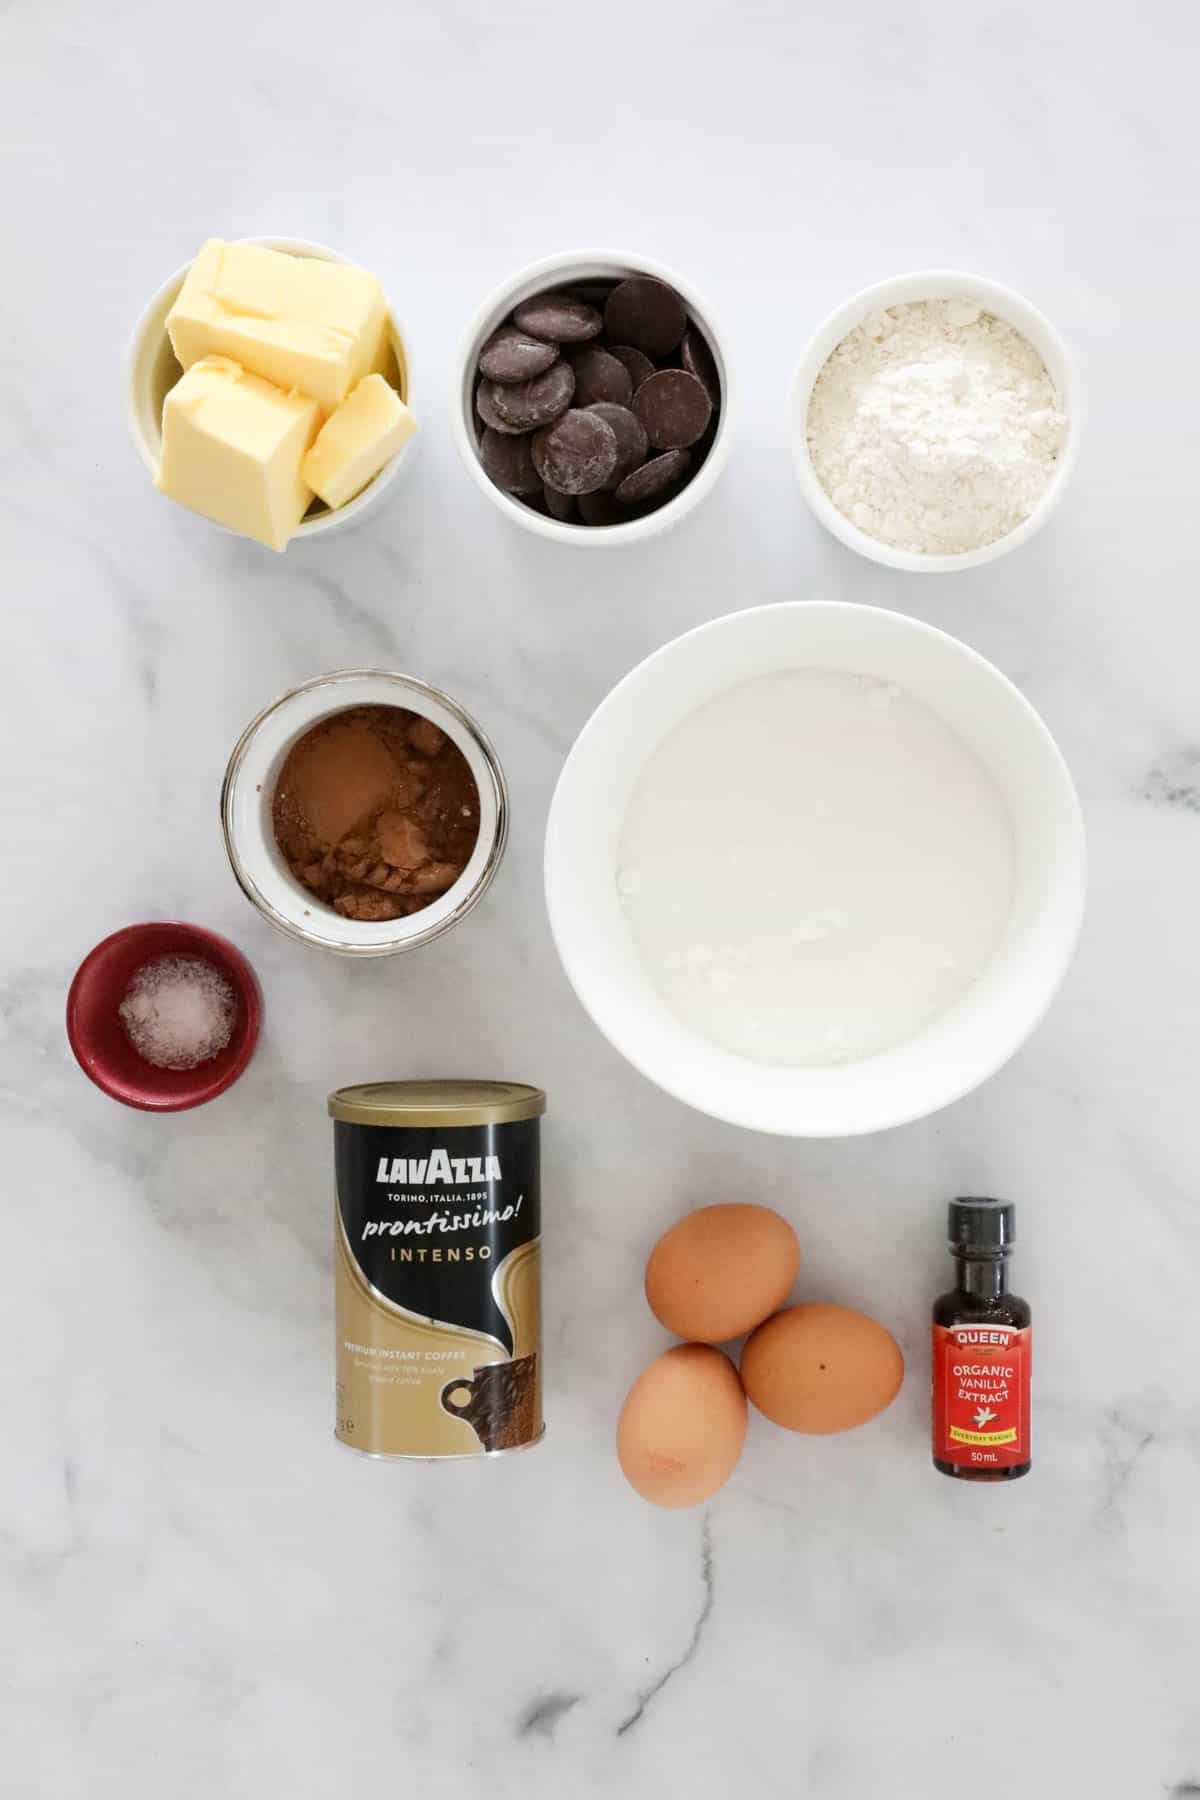 Ingredients needed to make the recipe weighed and measured and placed in individual bowls.